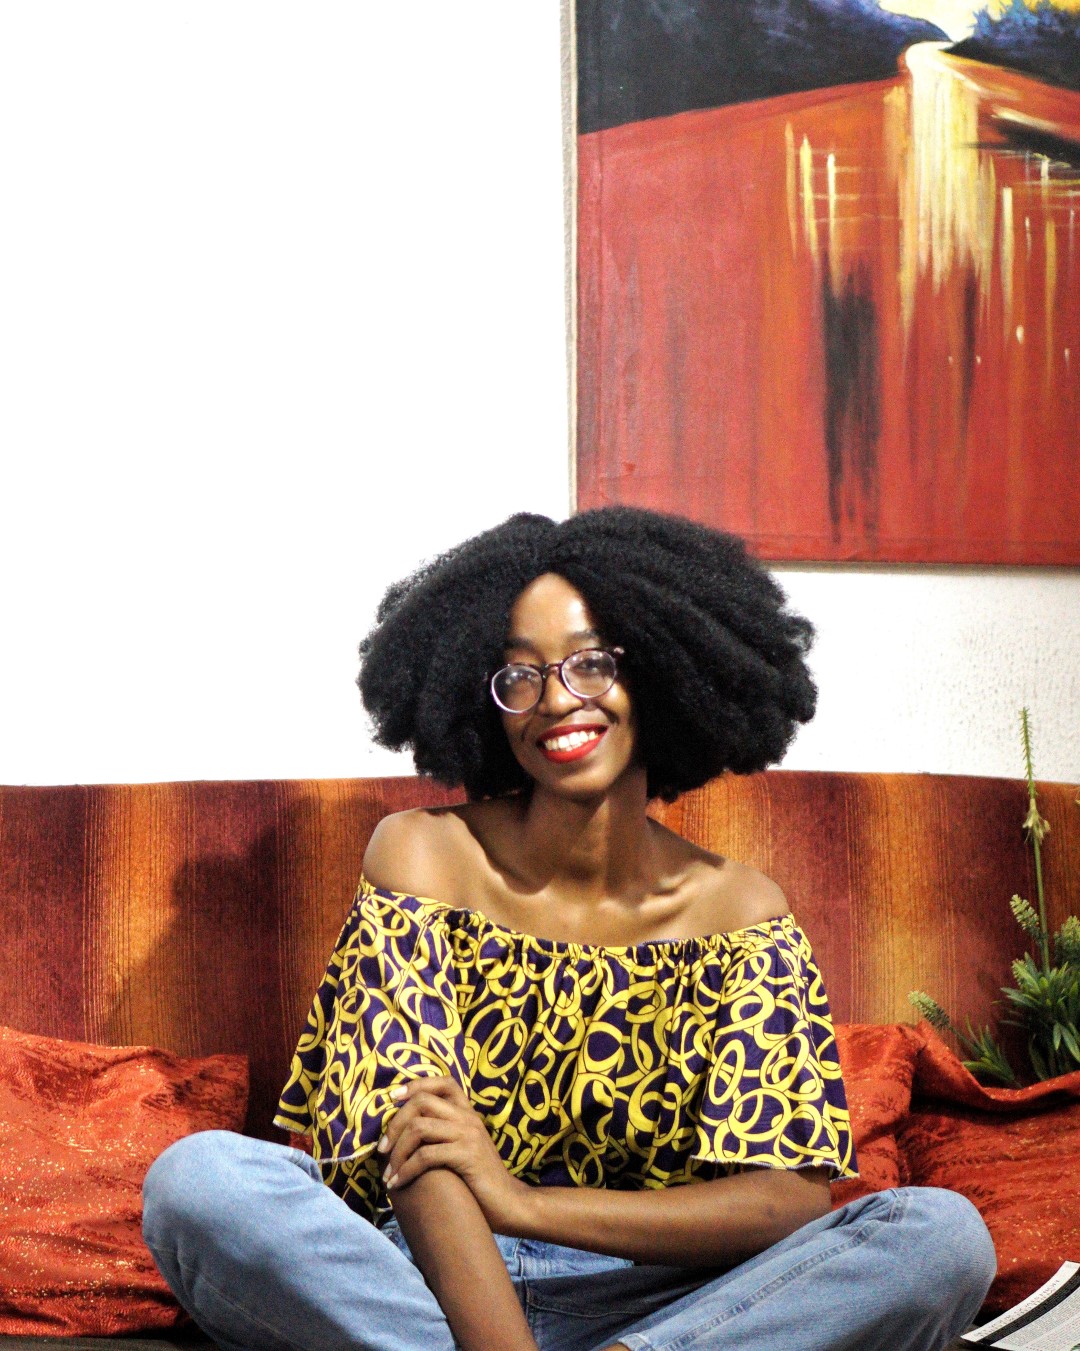 Blogger Cassie Daves on how to be alone and self love